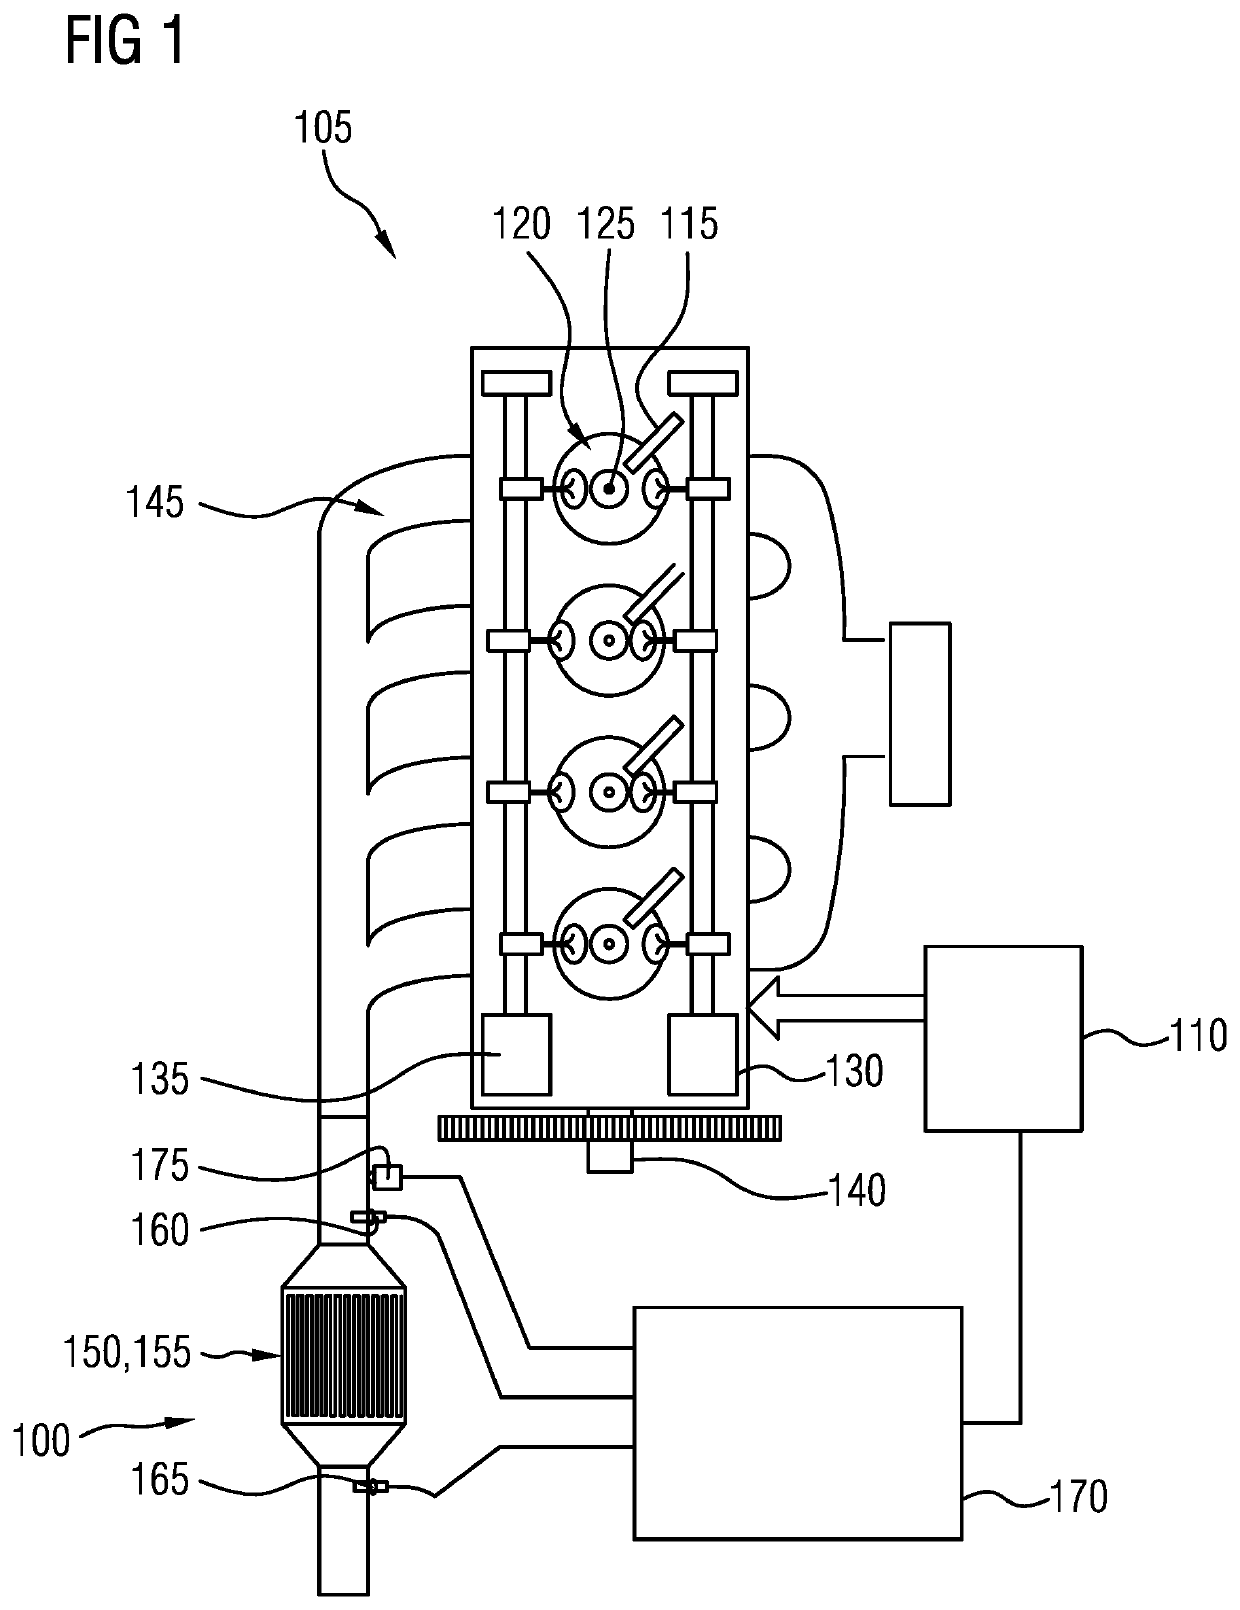 Exhaust gas treatment for an internal combustion engine